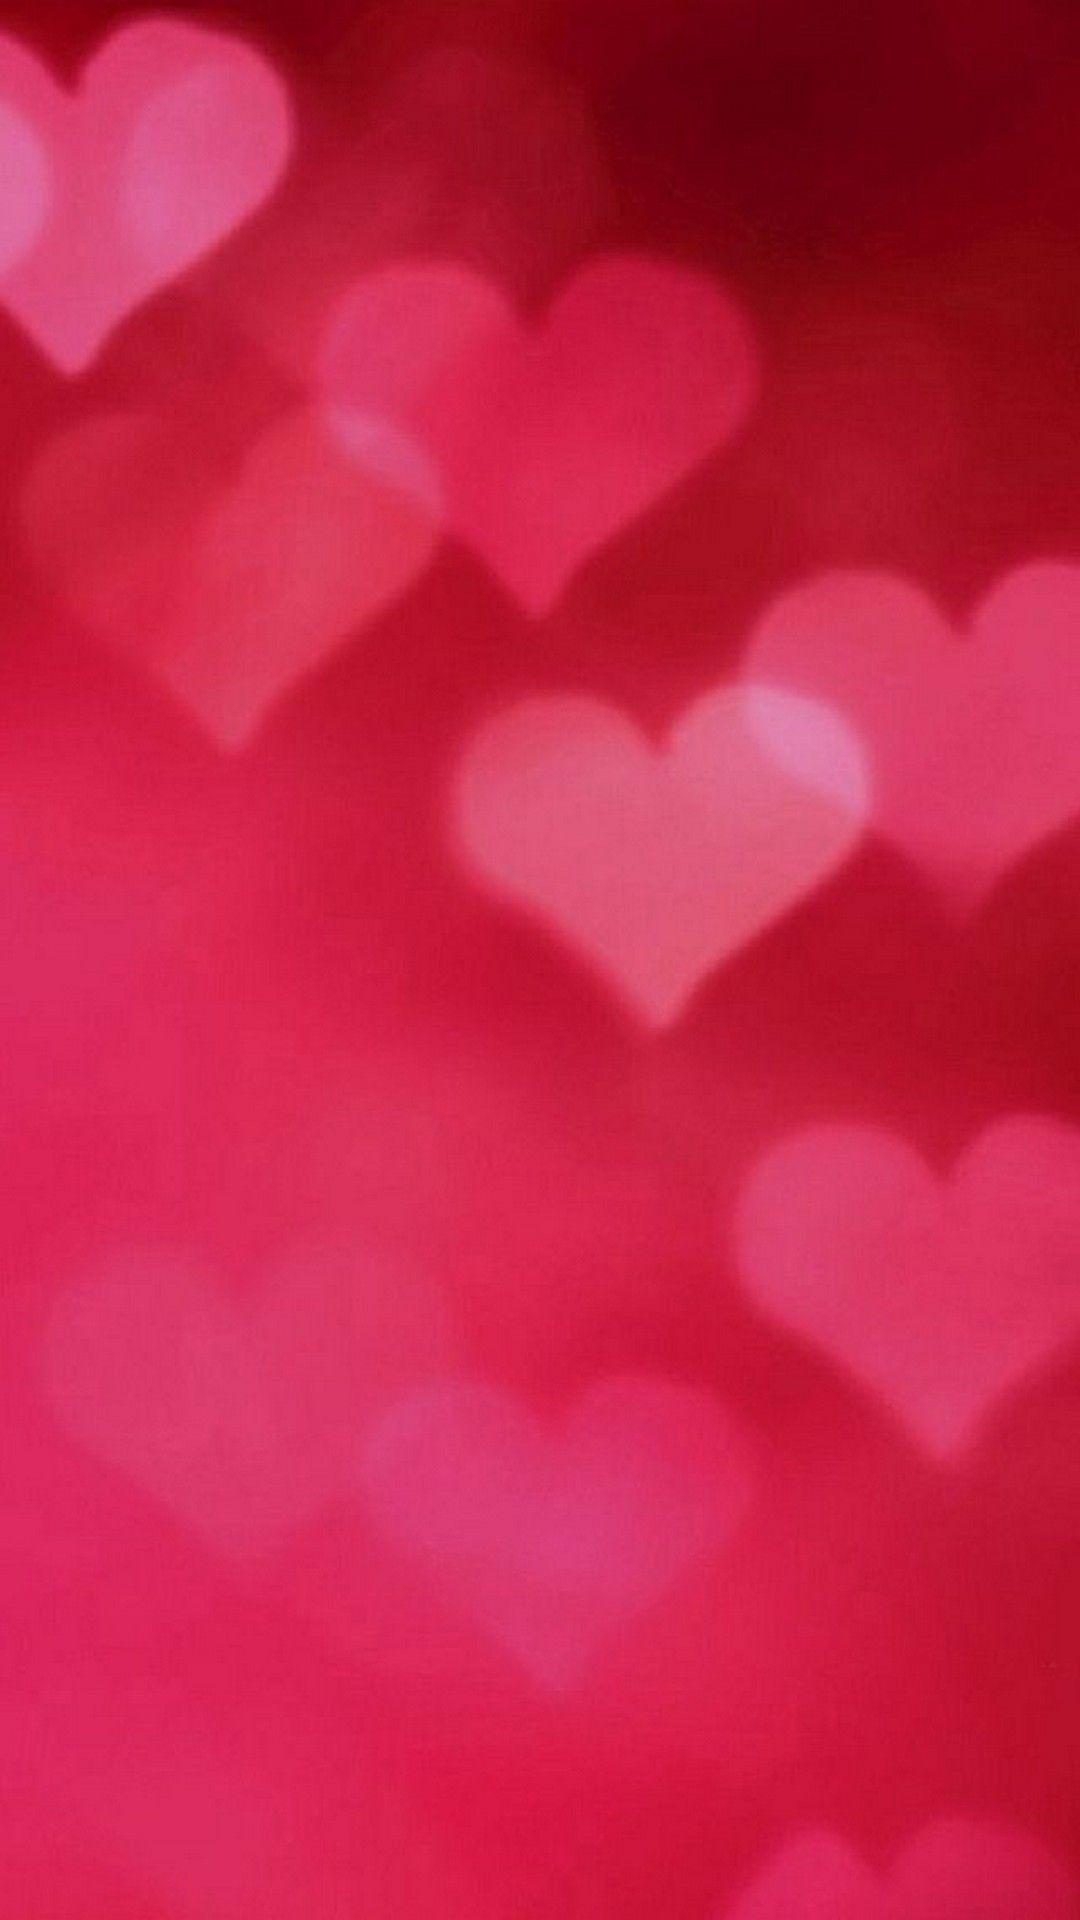 1080x1920 Valentines Day Wallpaper iPhone 6